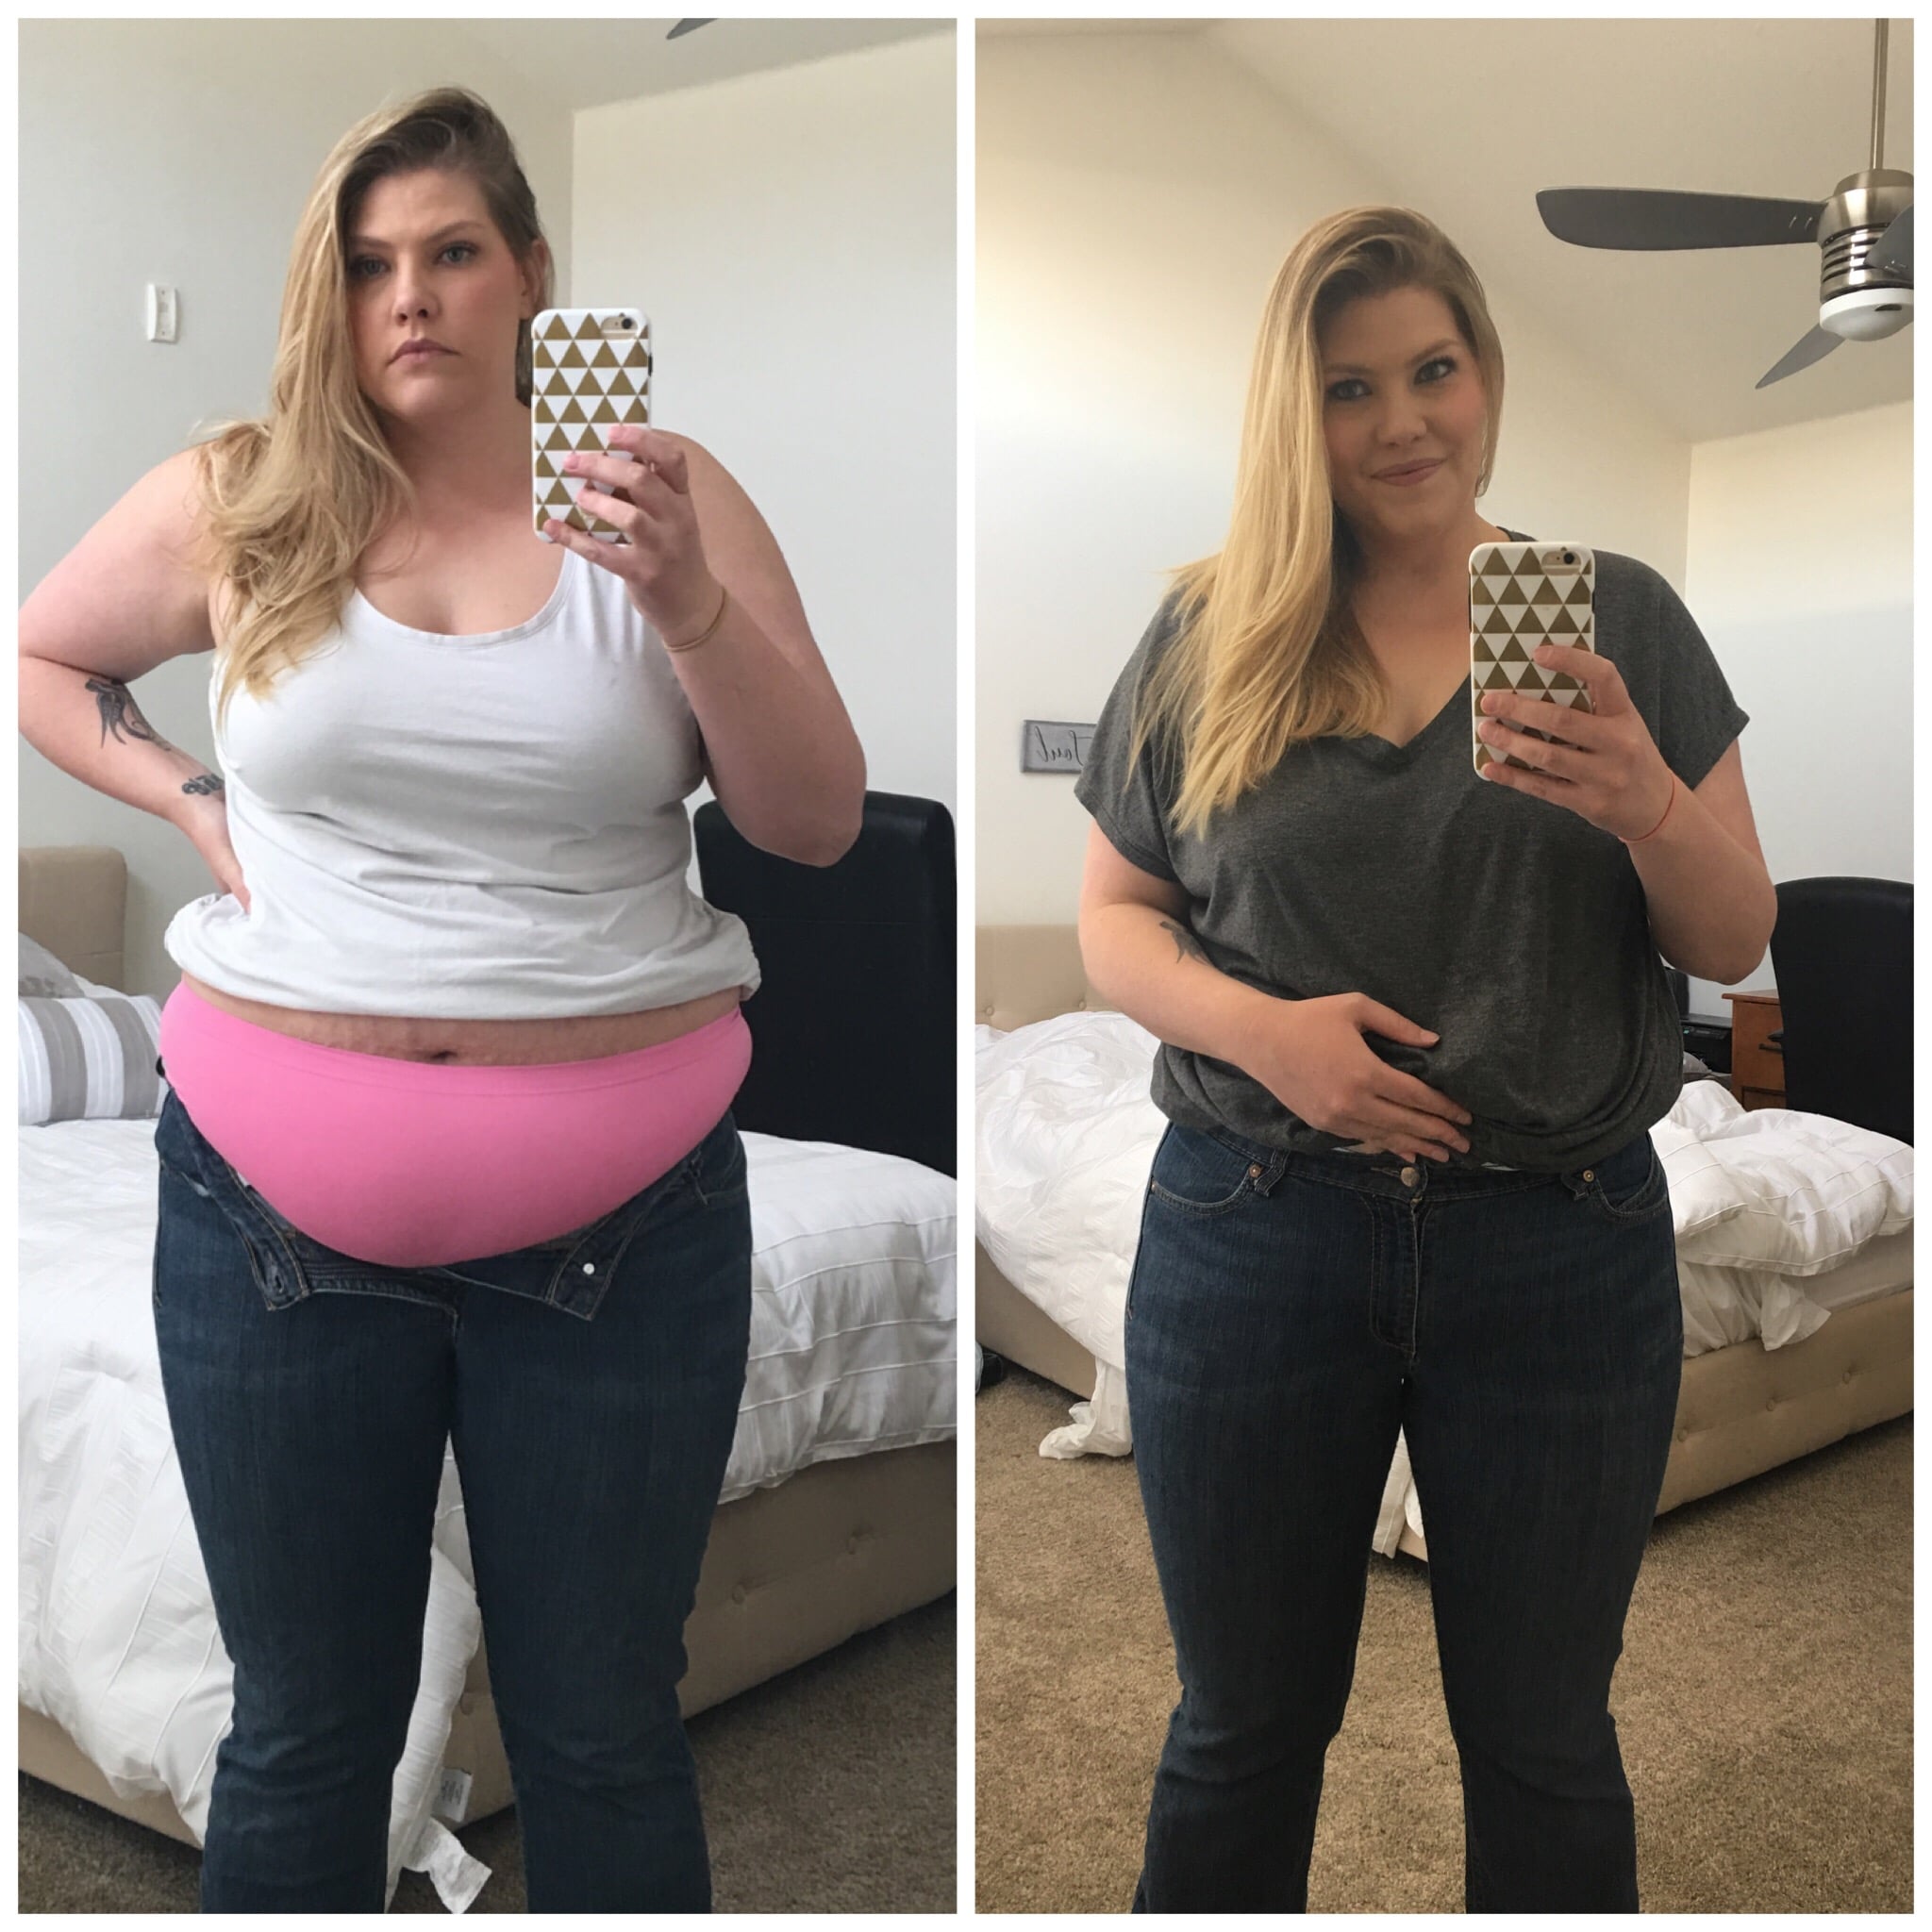 Weight Loss Inspiration: How One Woman Lost 60 Pounds and Regained